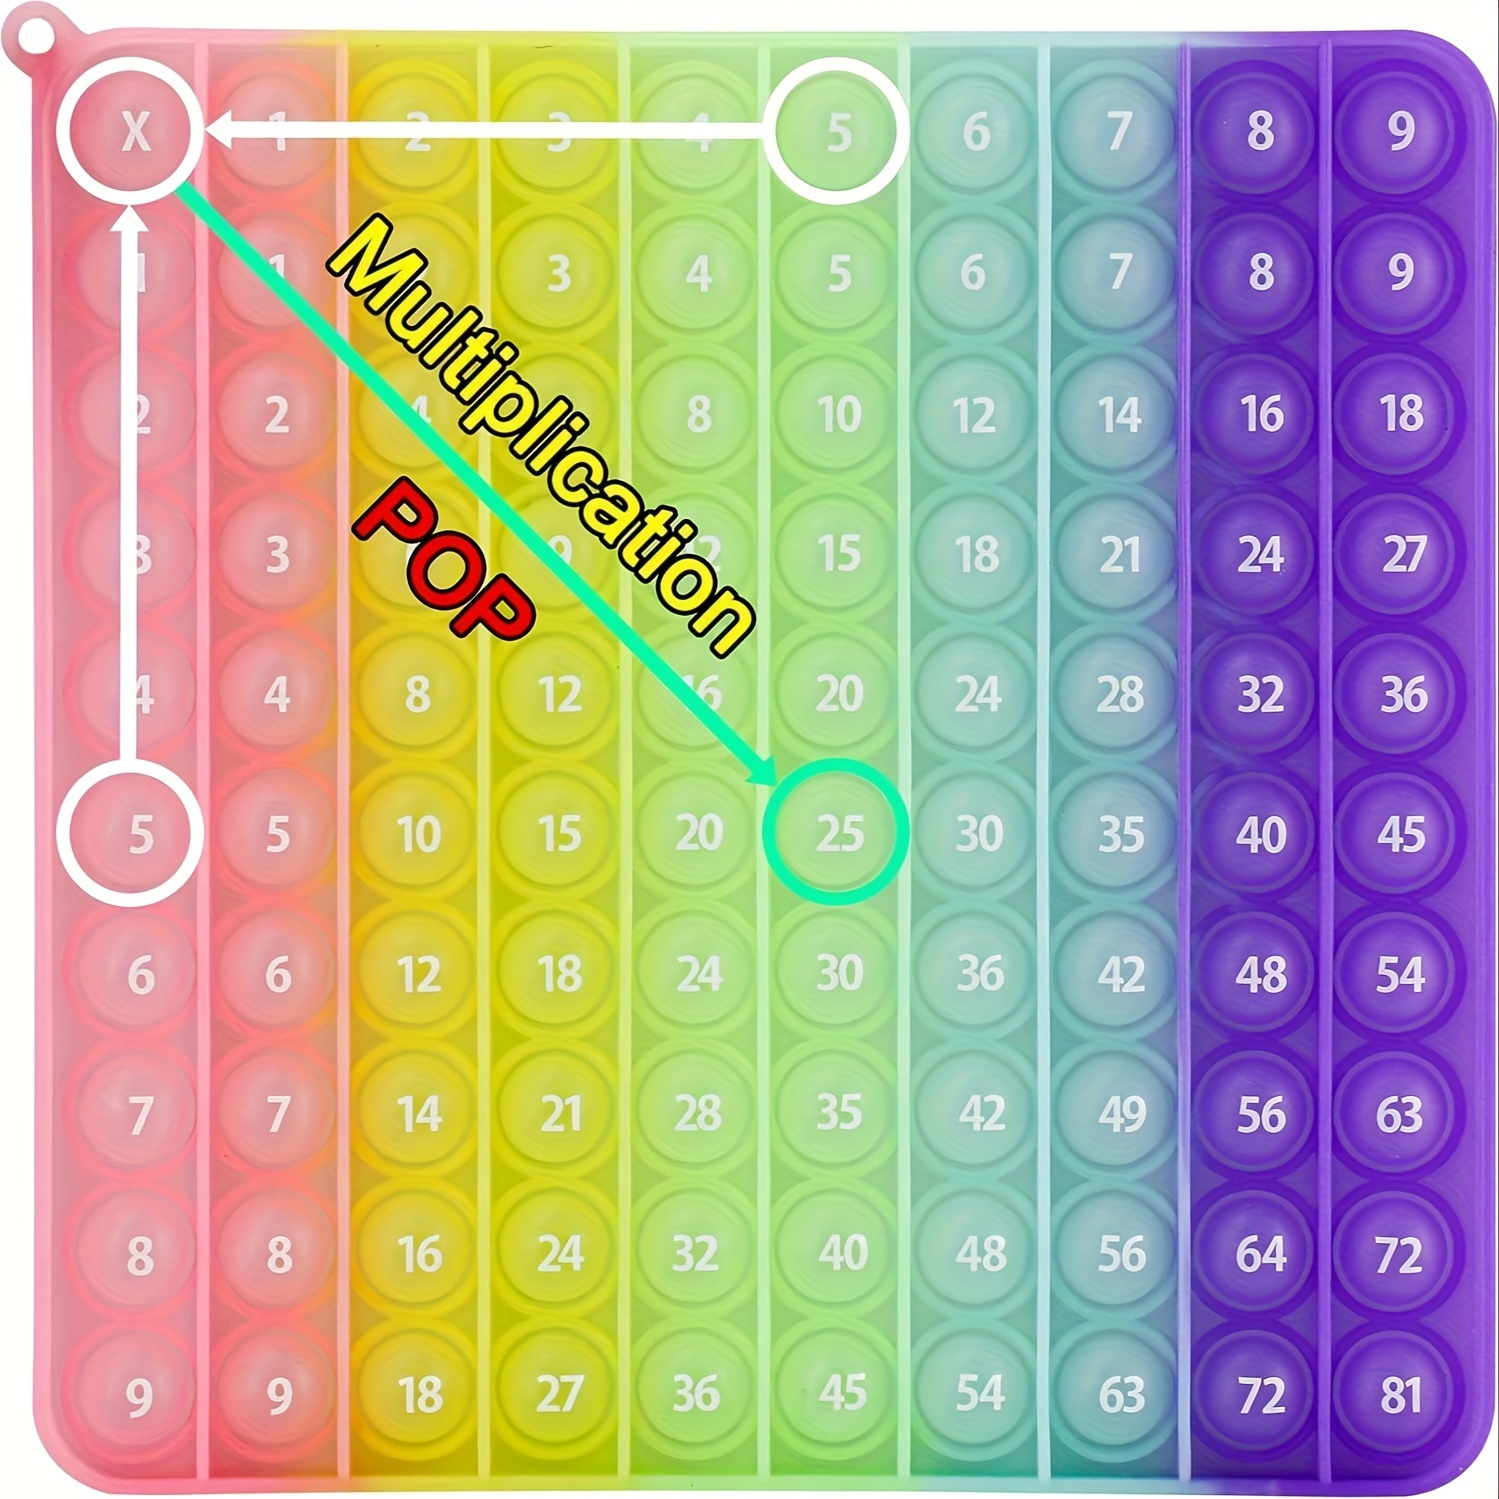 Times Table Multiplication Wall Poster A3 Chart - RAINBOW FAIRY Girls  Education